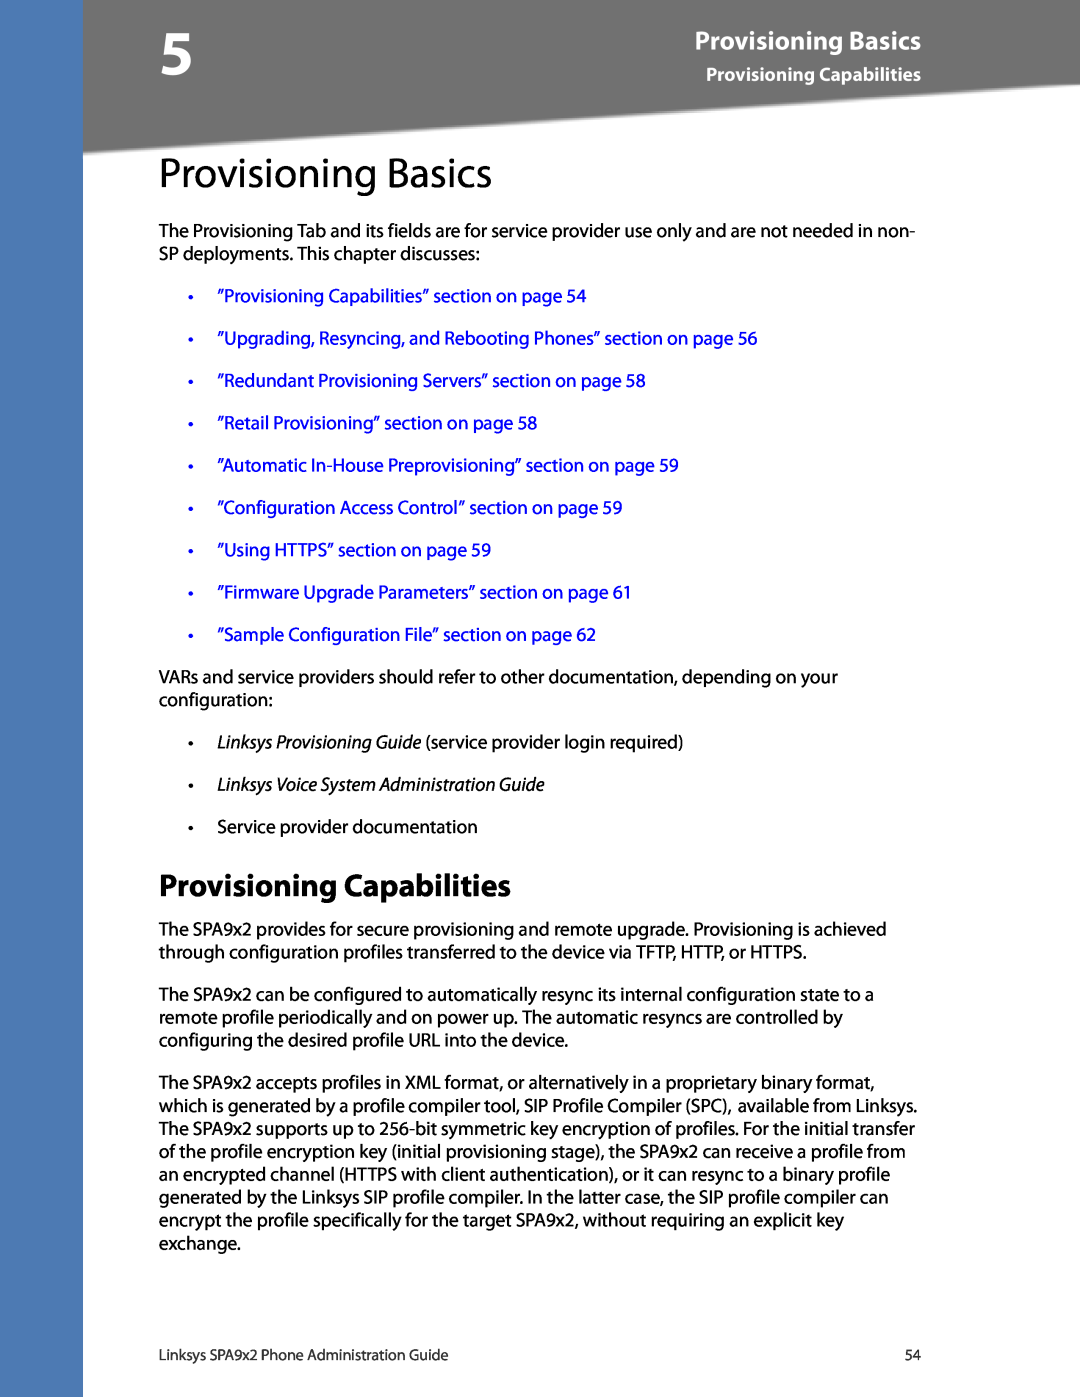 Linksys SPA942 Provisioning Basics, ”Provisioning Capabilities” section on page, ”Retail Provisioning” section on page 